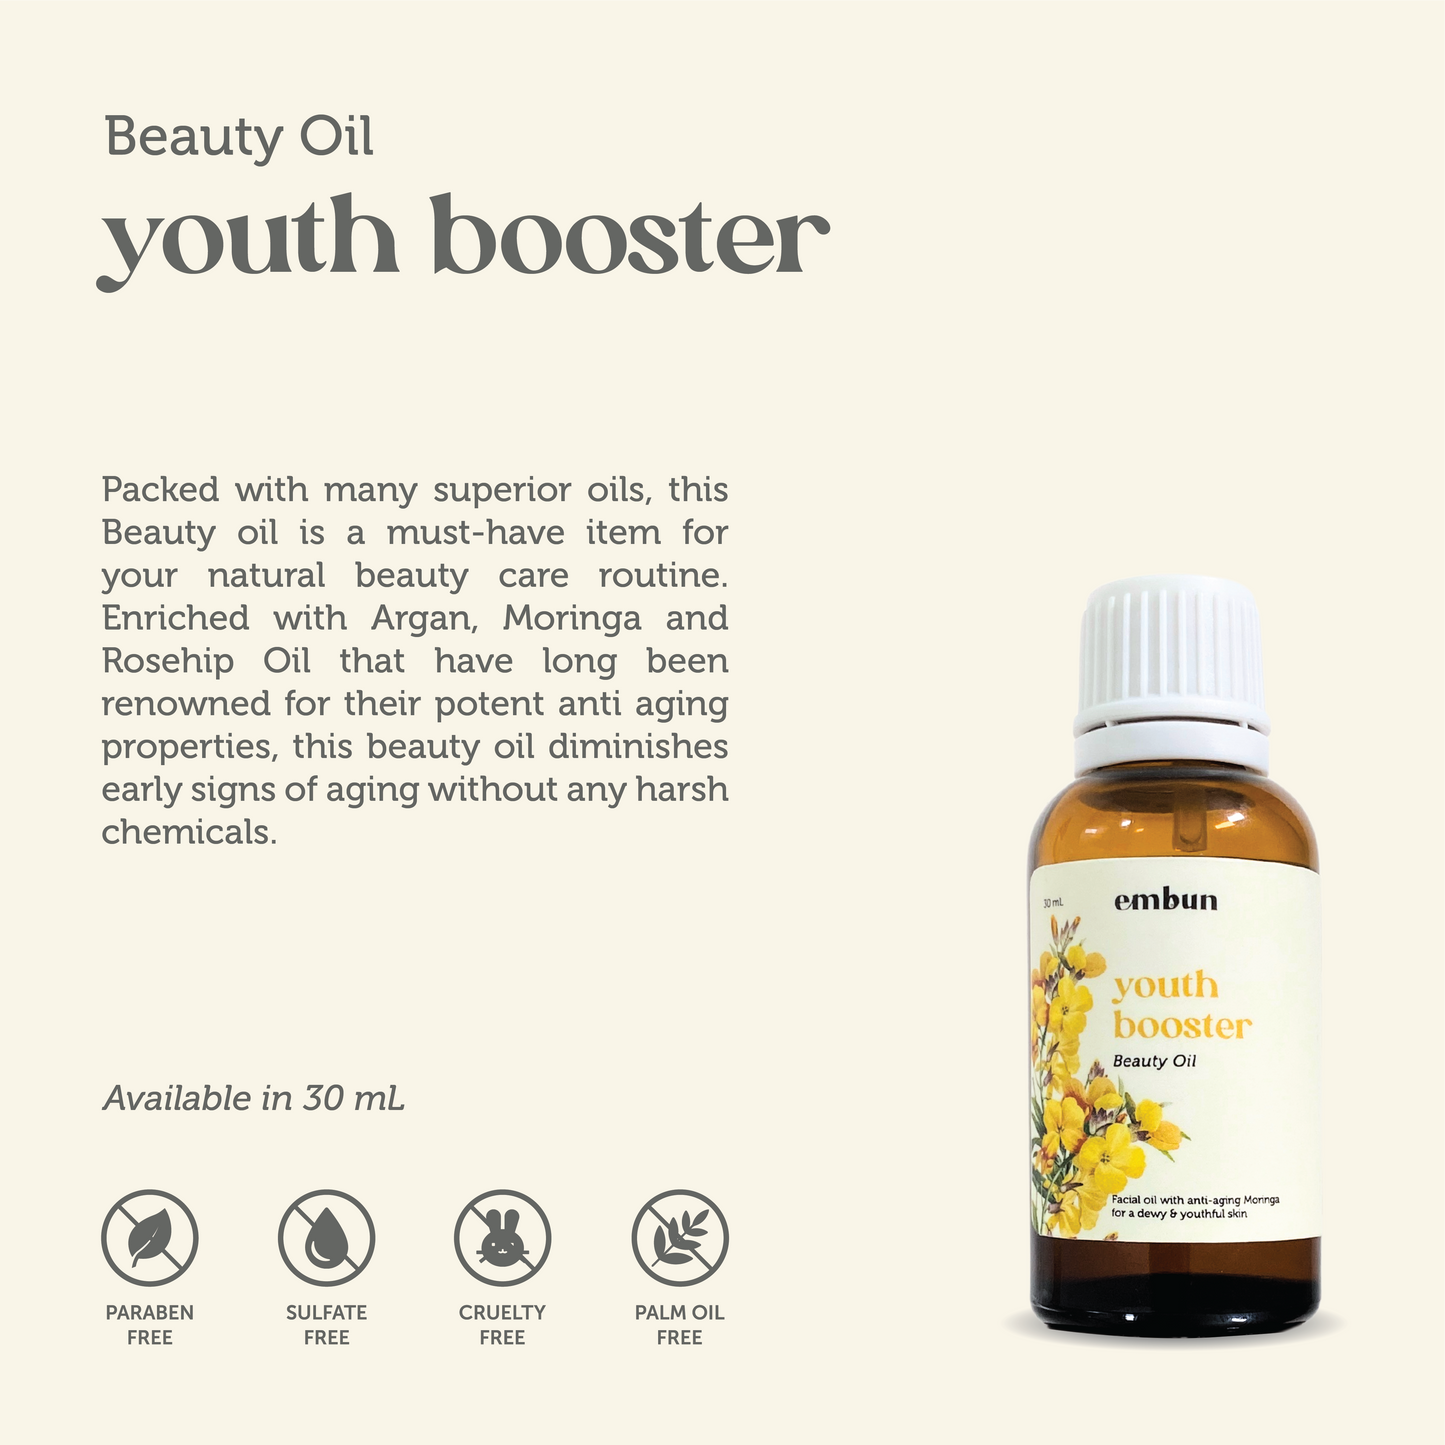 Beauty Oil Youth Booster 30 ml